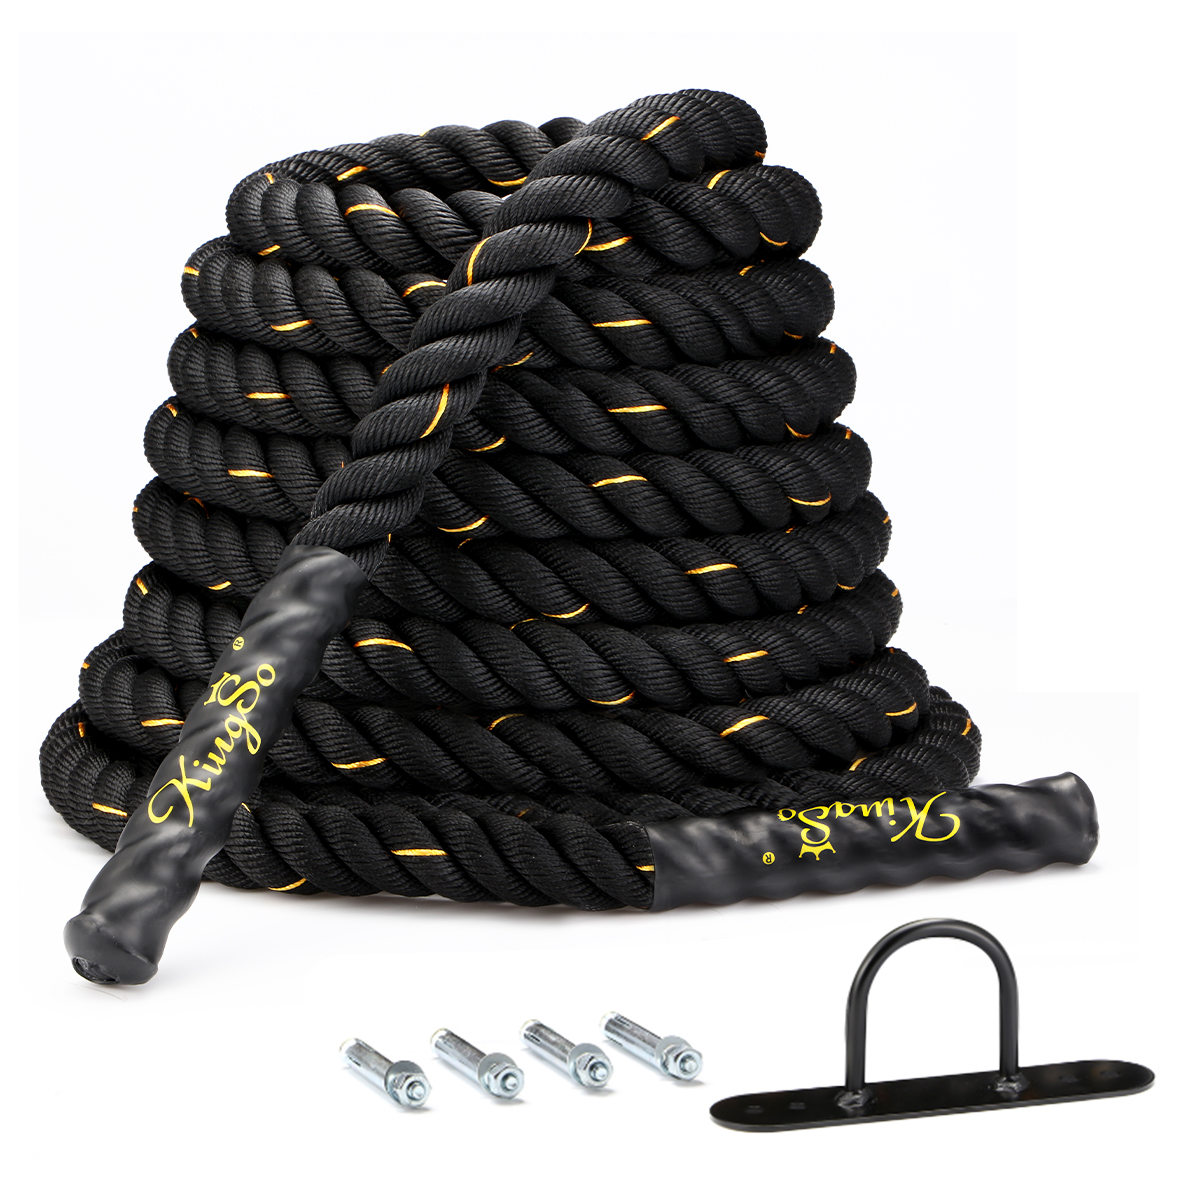 38x9cm-Length-Workout-Strength-Training-Undulation-Rope-Fitness-Equipment-Home-Gym-Exercise-Tools-1657188-3